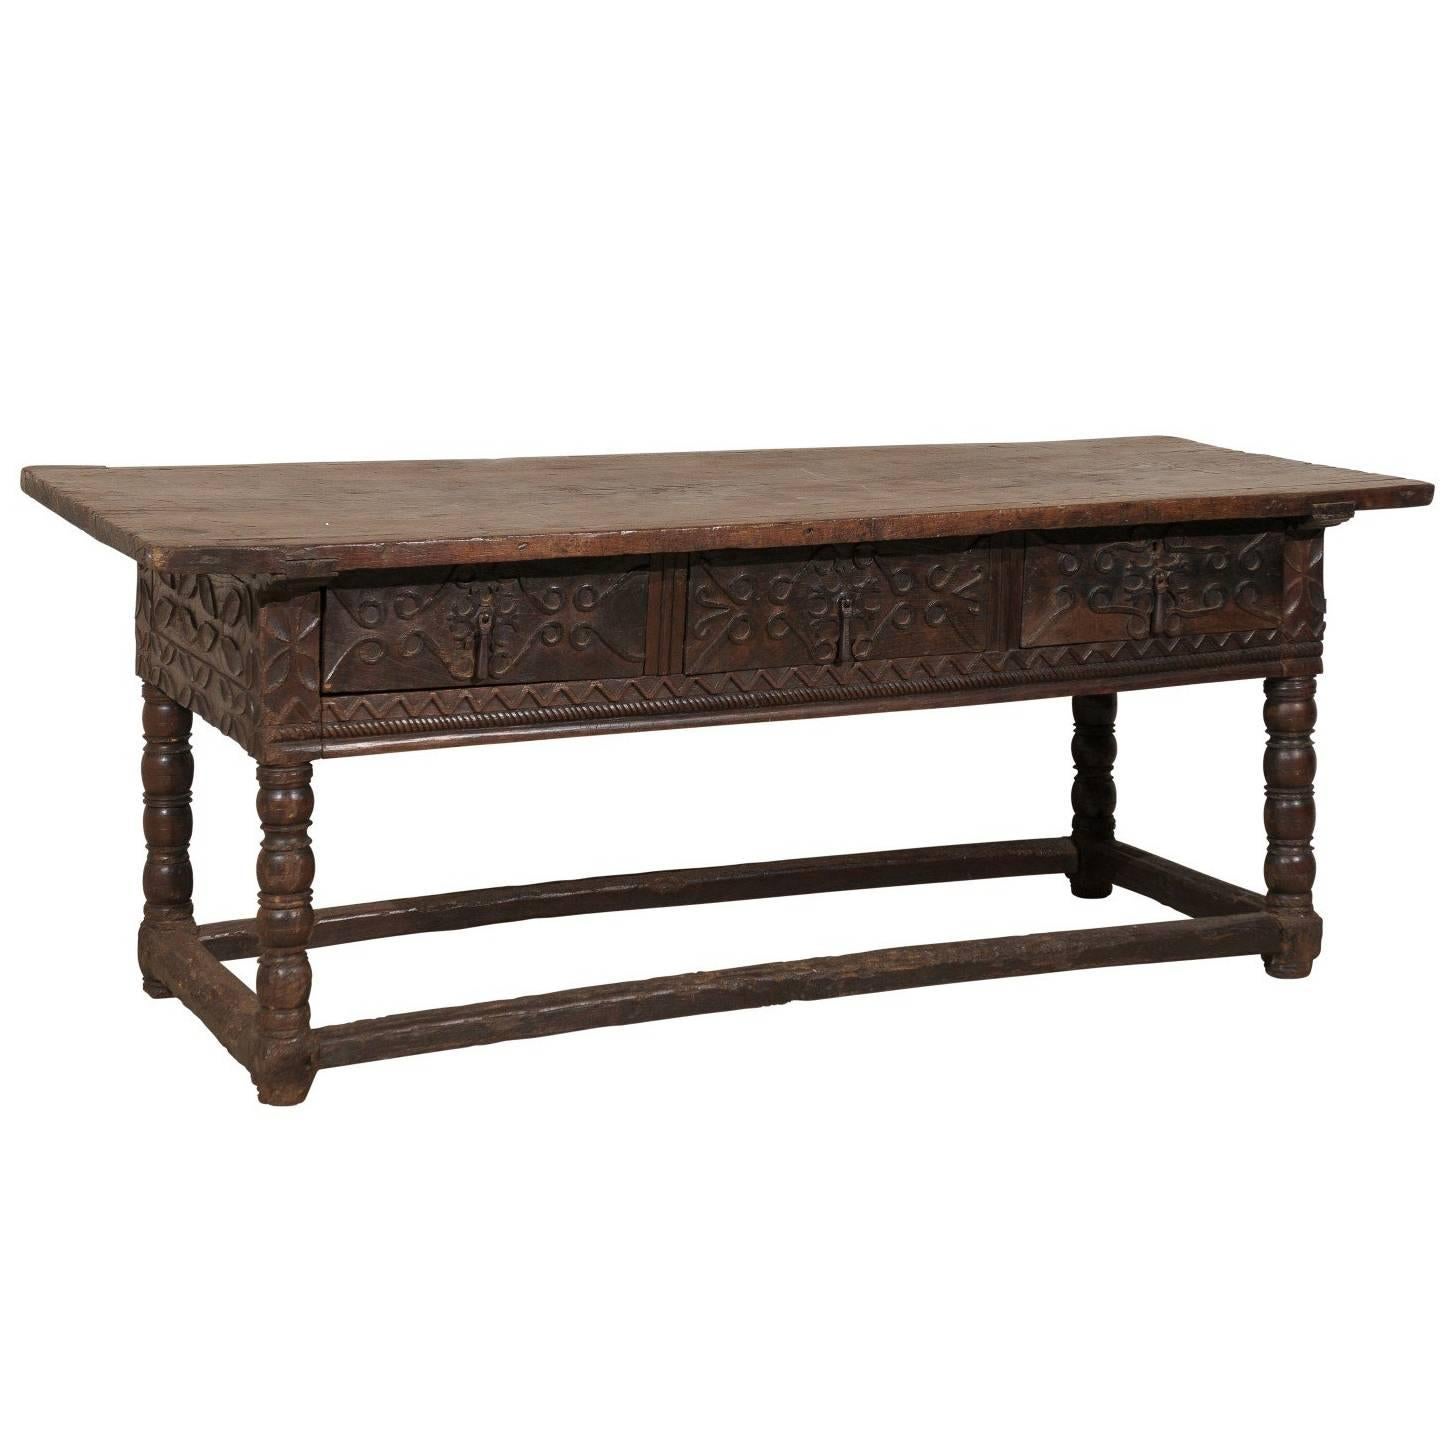 Elegant Spanish Early 18th Century Console/Library Table with Three Drawers